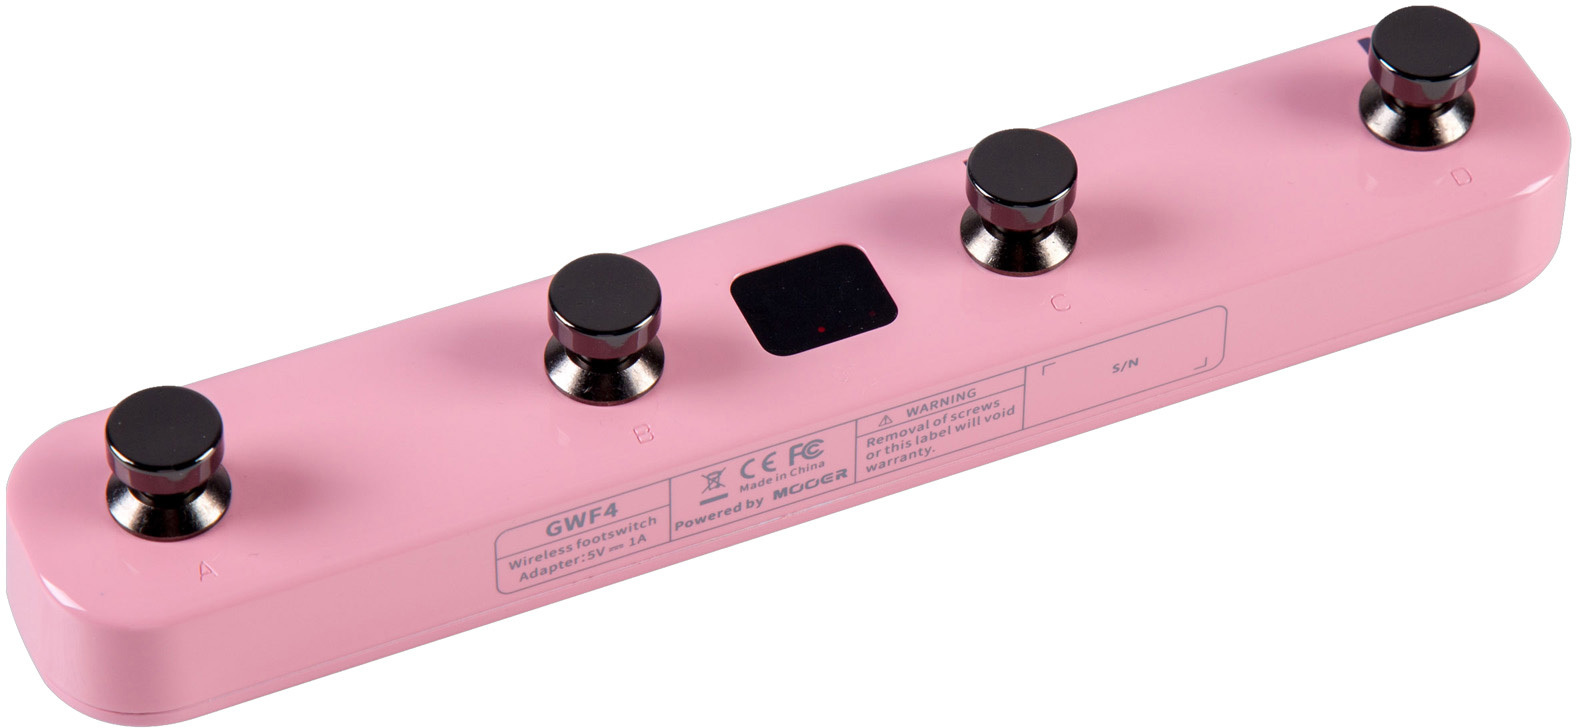 Mooer Gwf4 Gtrs Wireless Footswitch Shell Pink - Volume, boost & expression effect pedal - Main picture